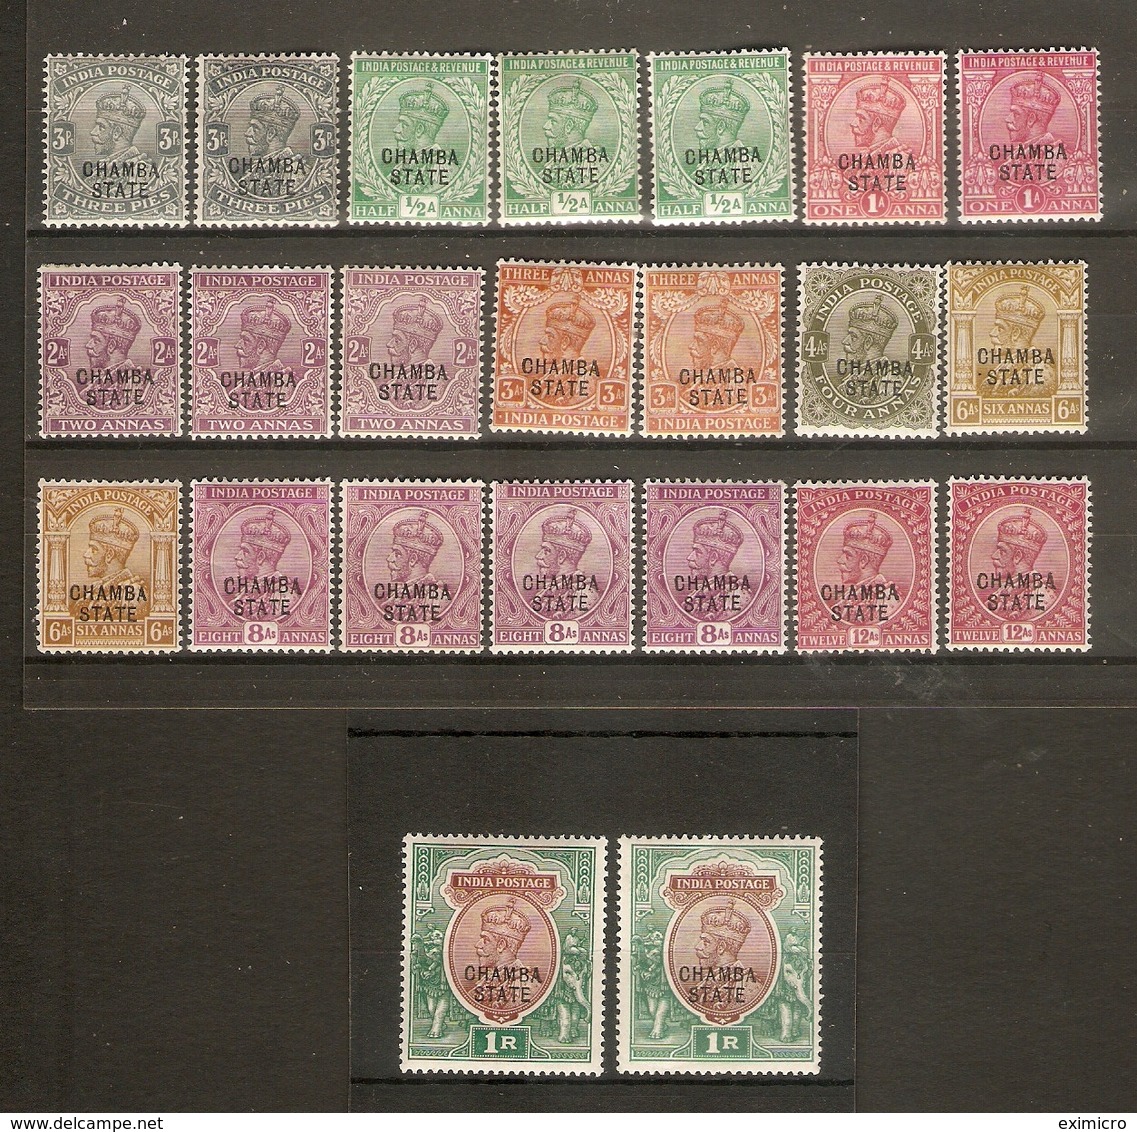 INDIA - CHAMBA 1913 - 1923 SET OF 23 STAMPS INC. MOST CATALOGUE LISTED COLOUR VARIETIES SG 43/53b (L)MM Cat £290+ - Chamba